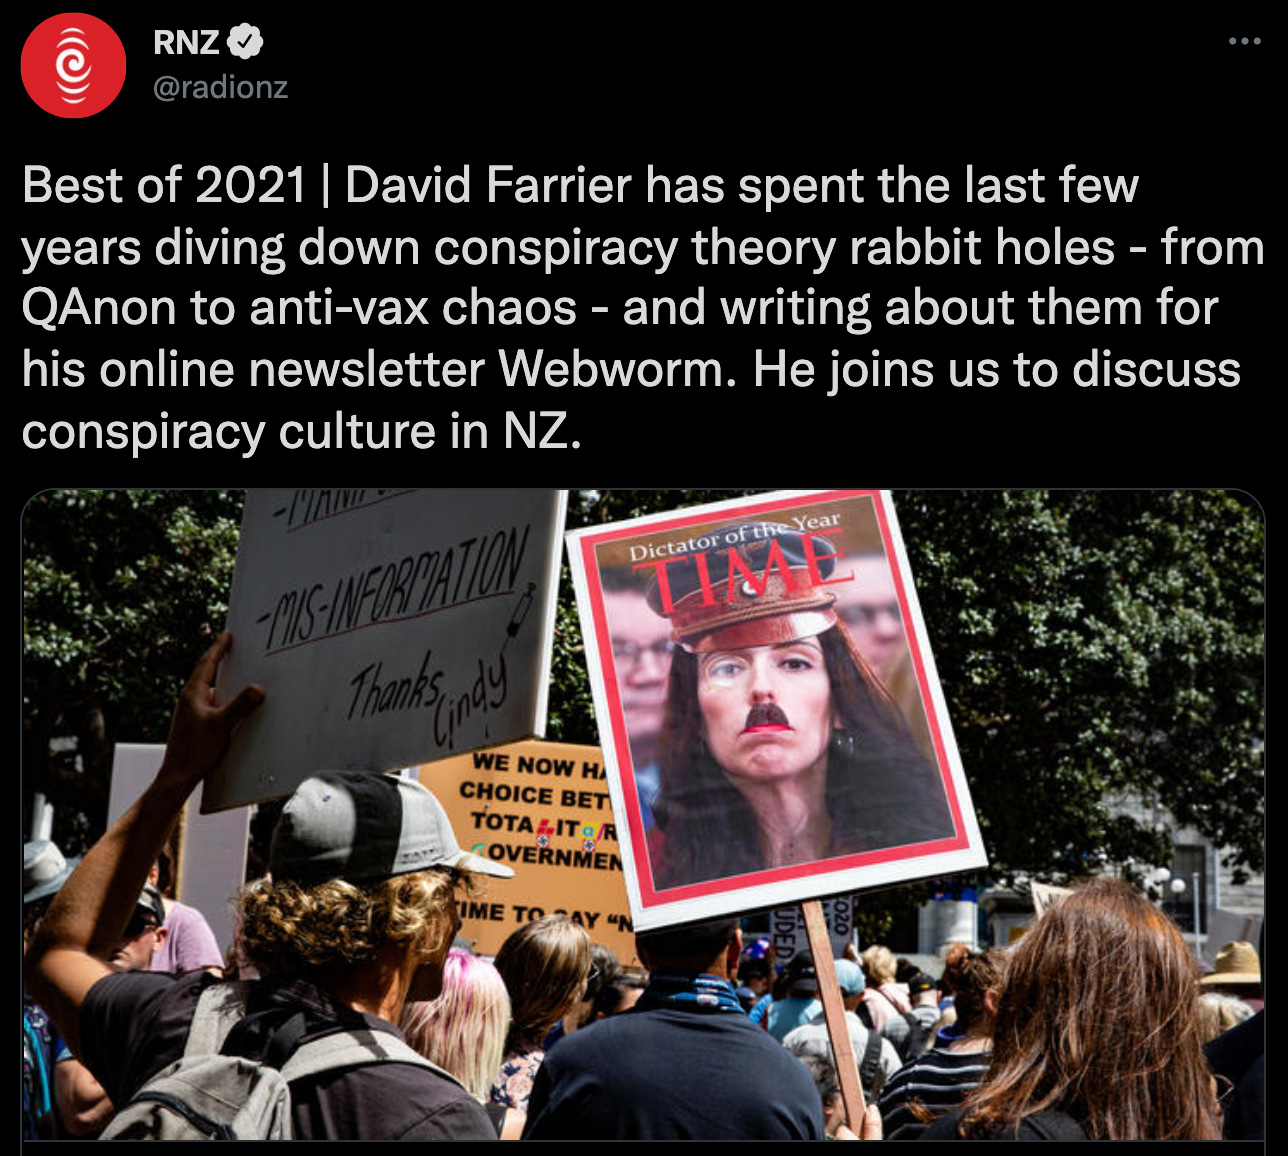 "Best of 2021 | David Farrier has spent the last few years diving down conspiracy theory rabbit holes - from QAnon to anti-vax chaos - and writing about them for his online newsletter Webworm. He joins us to discuss conspiracy culture in NZ."